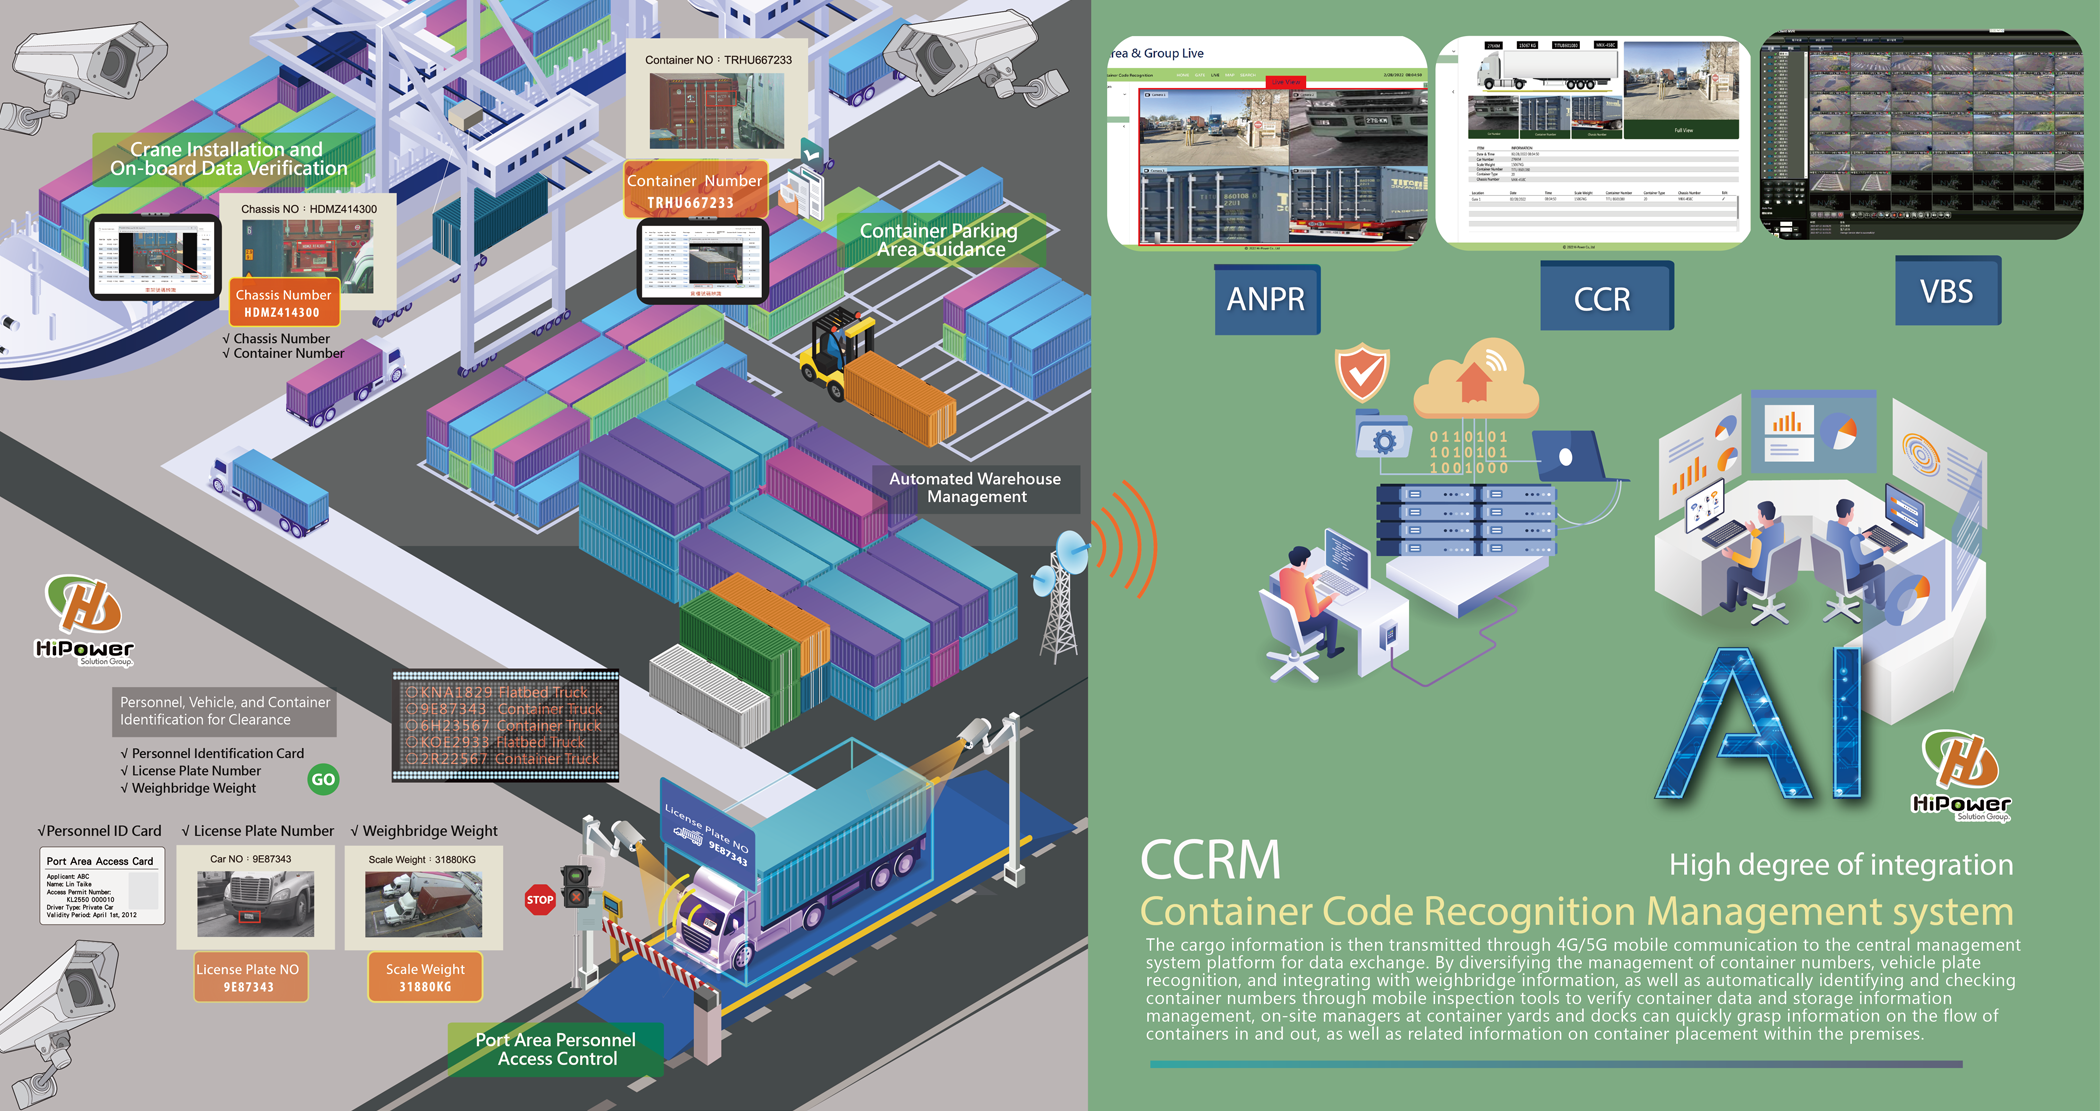 CCRM Container Code Recognition Management